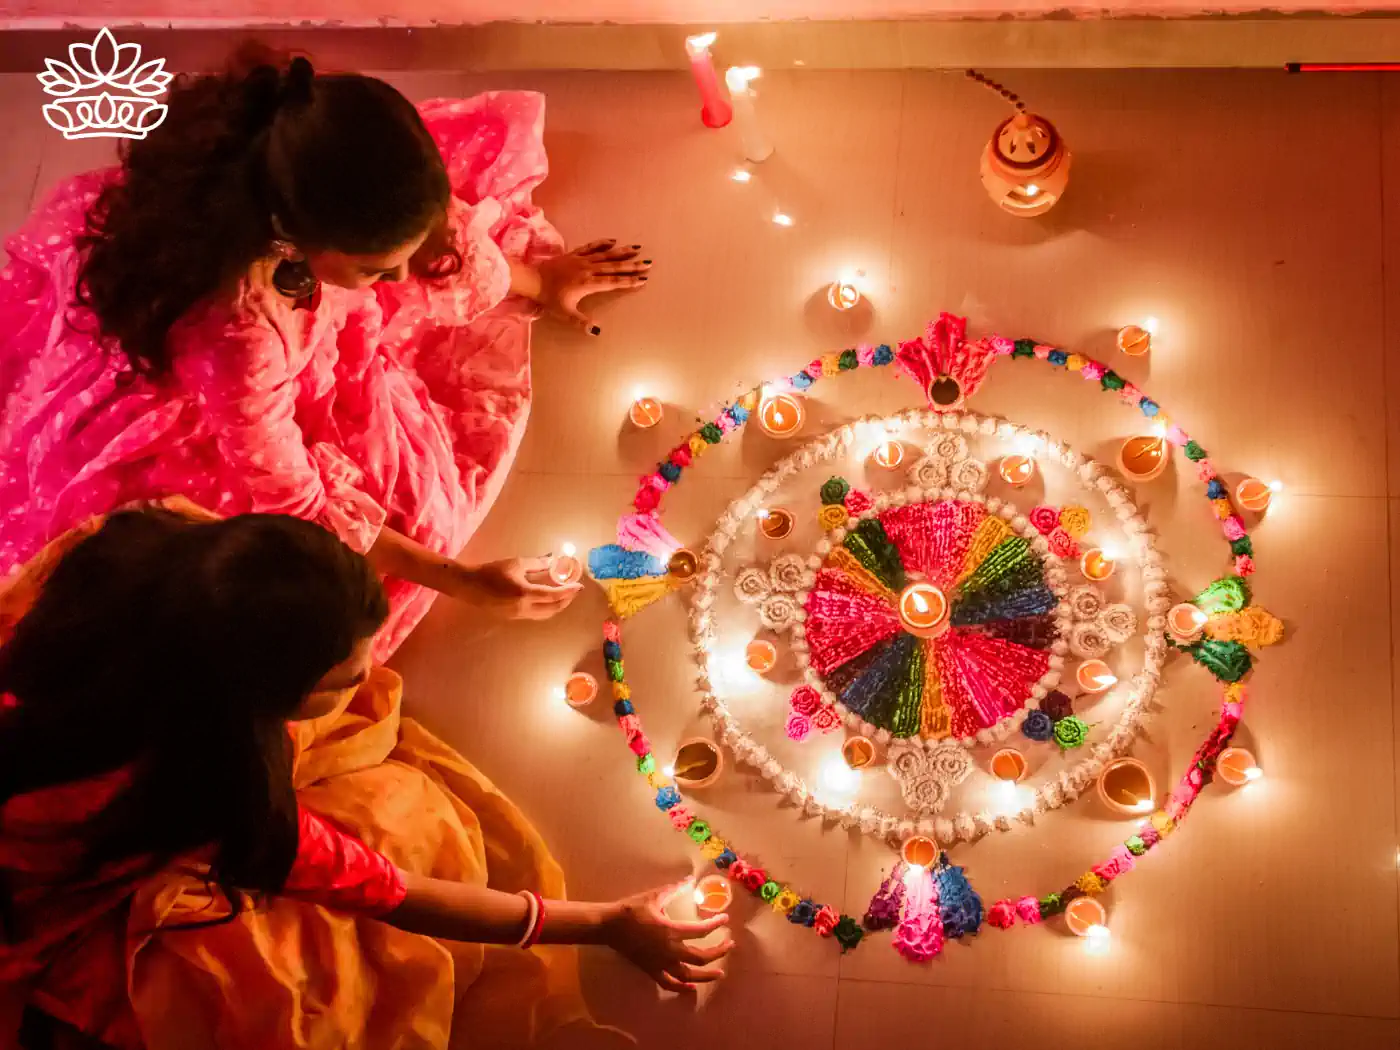 Two women in traditional attire creating a vibrant and intricate Rangoli design with candles and flower petals for Diwali celebration, evoking the festive spirit of unity and creativity. Diwali. Delivered with Heart by Fabulous Flowers and Gifts.